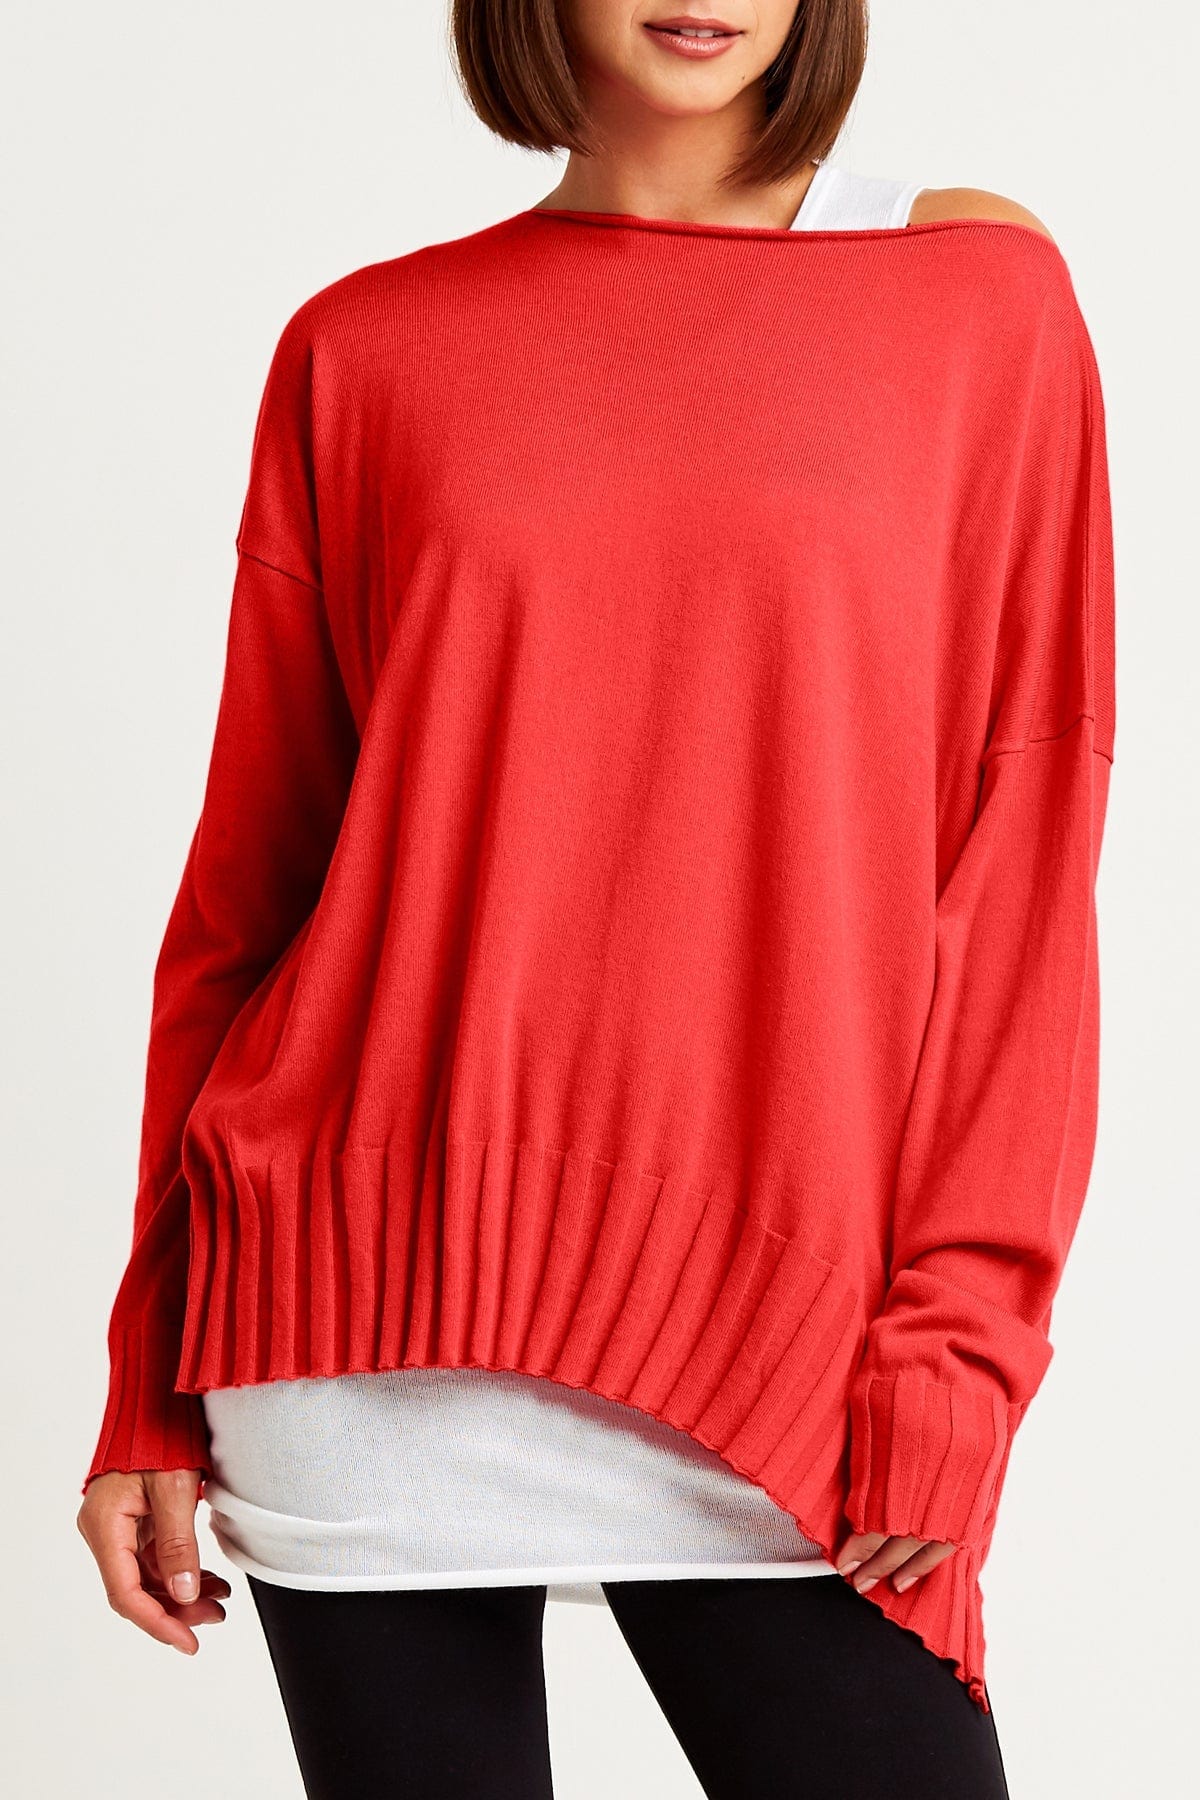 PLANET by Lauren G Women's Shirts & Tops Cherry / One Size Planet Ribbed Boatneck